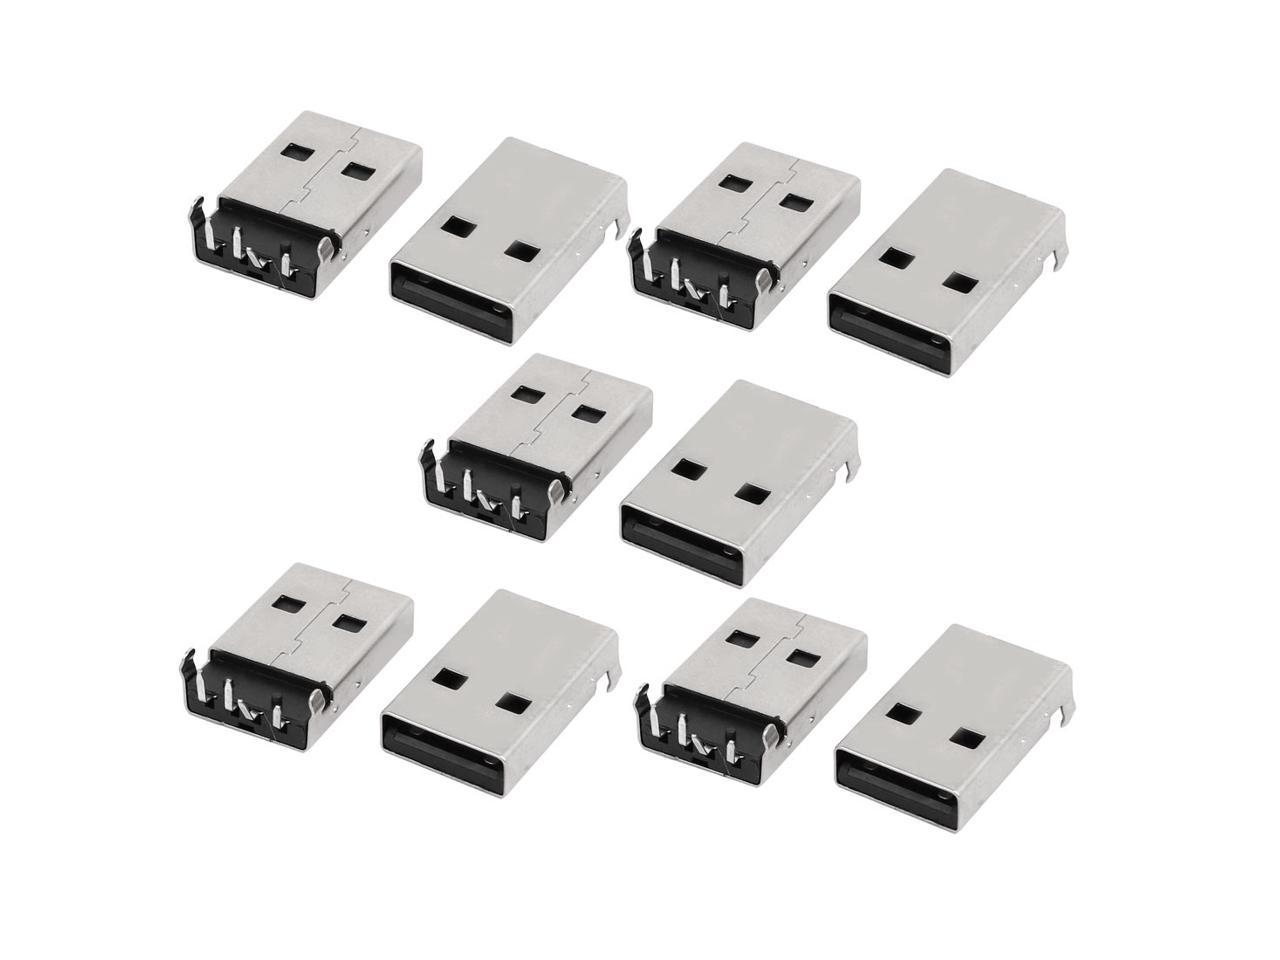 4Pcs USB 2.0 Type A Male Plug PCB Jack Connector with Flat or 90 deg Pins #4993